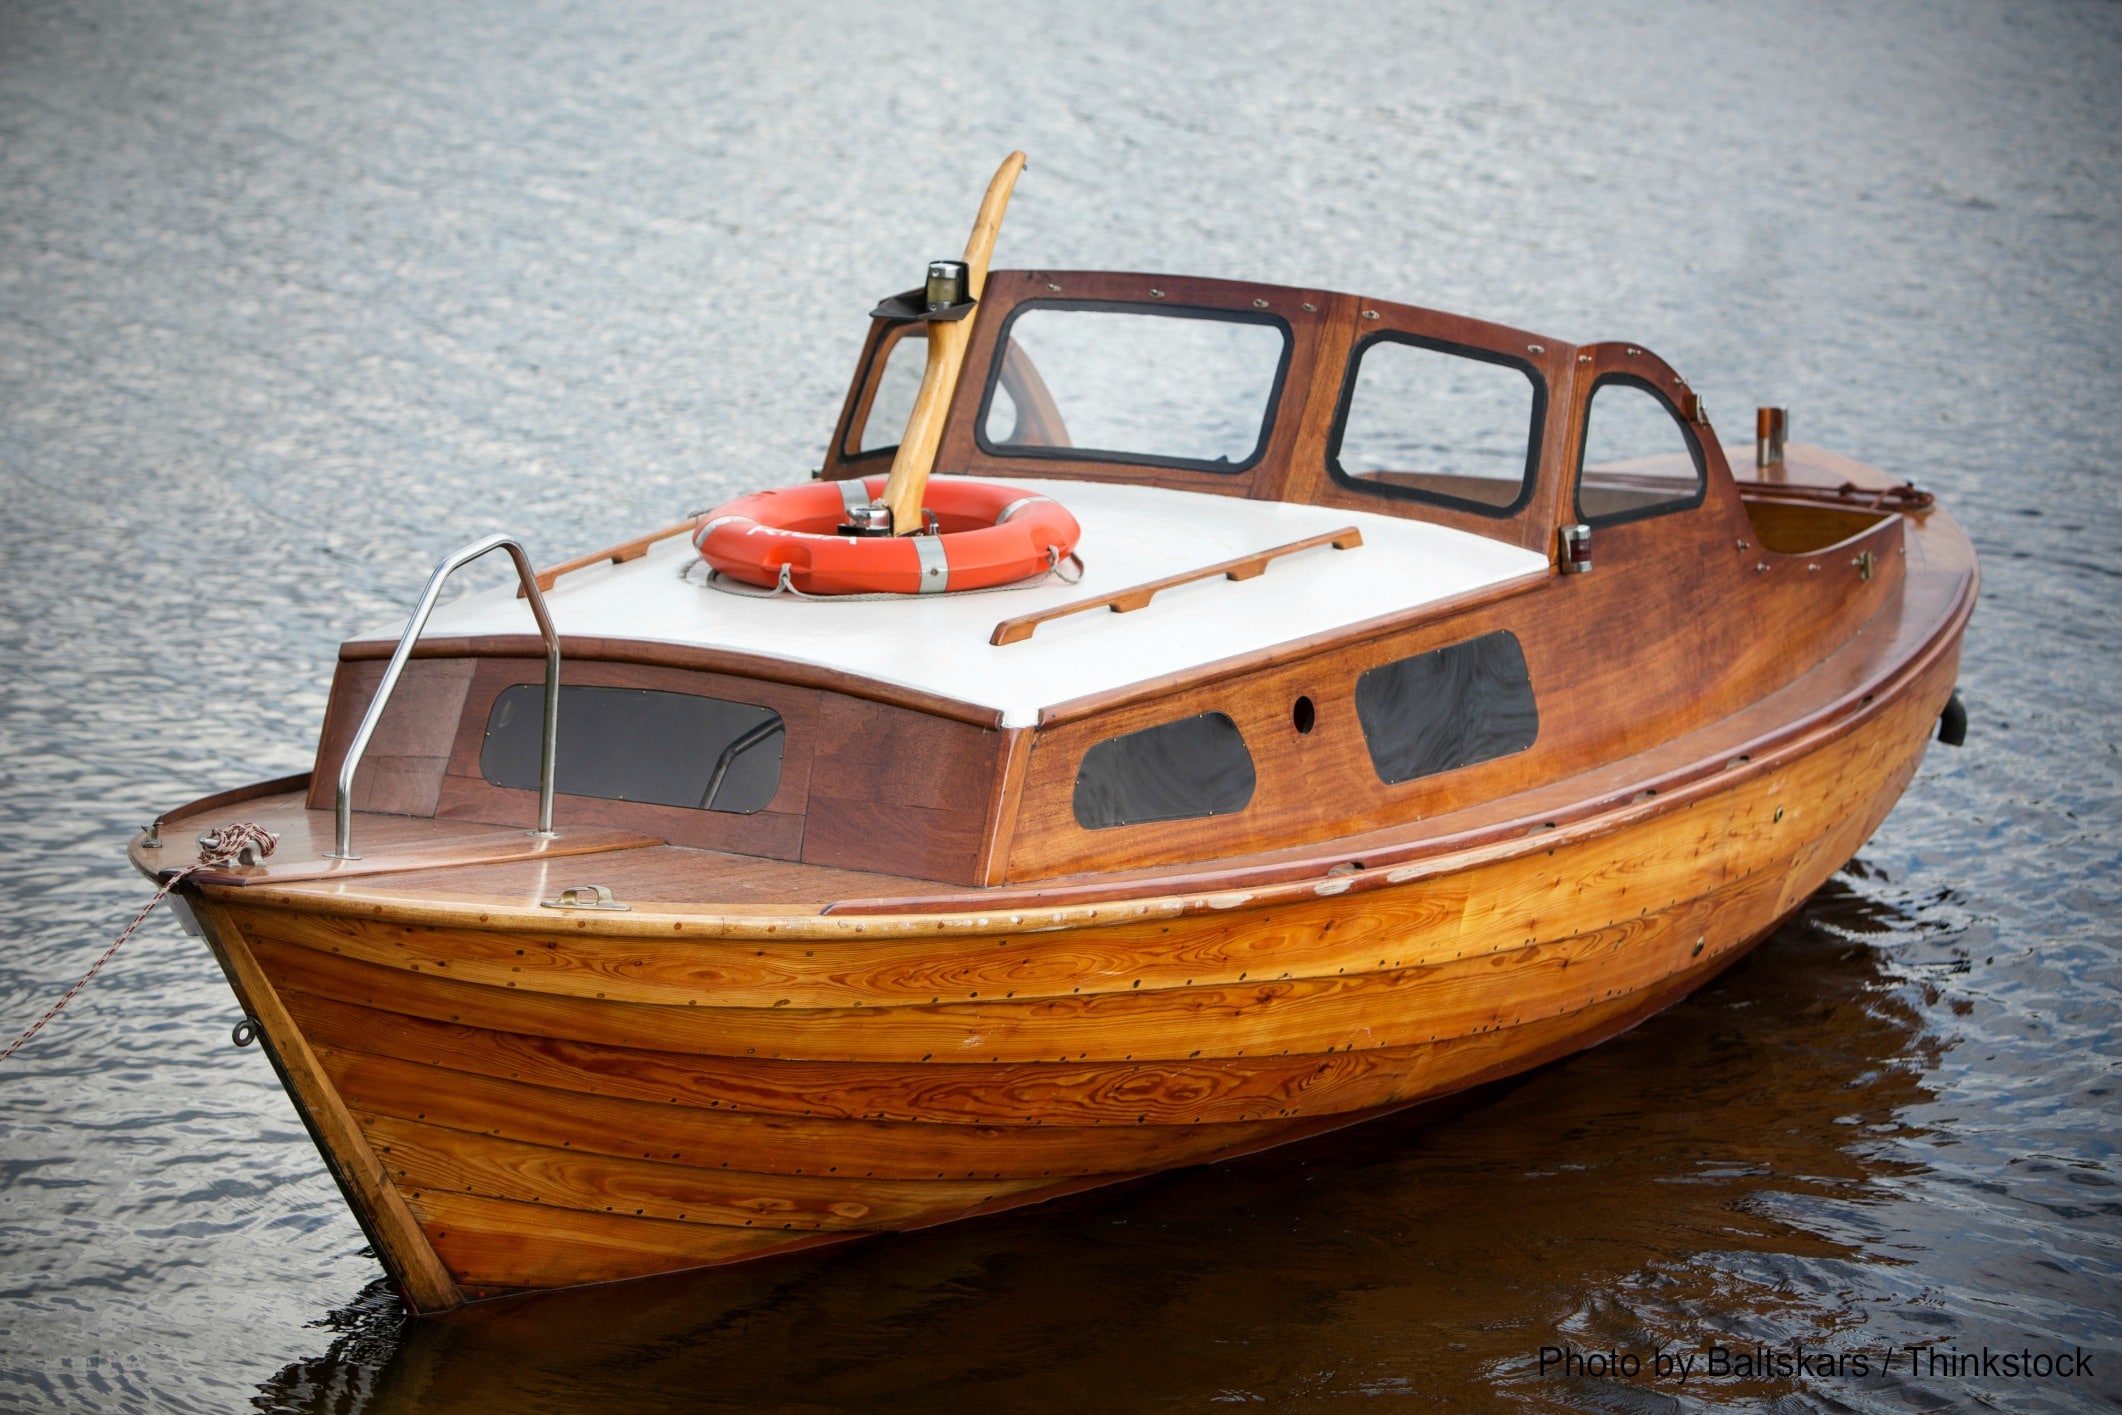 Everything You Need to Know about the Wooden Boat Show in Mystic, CT